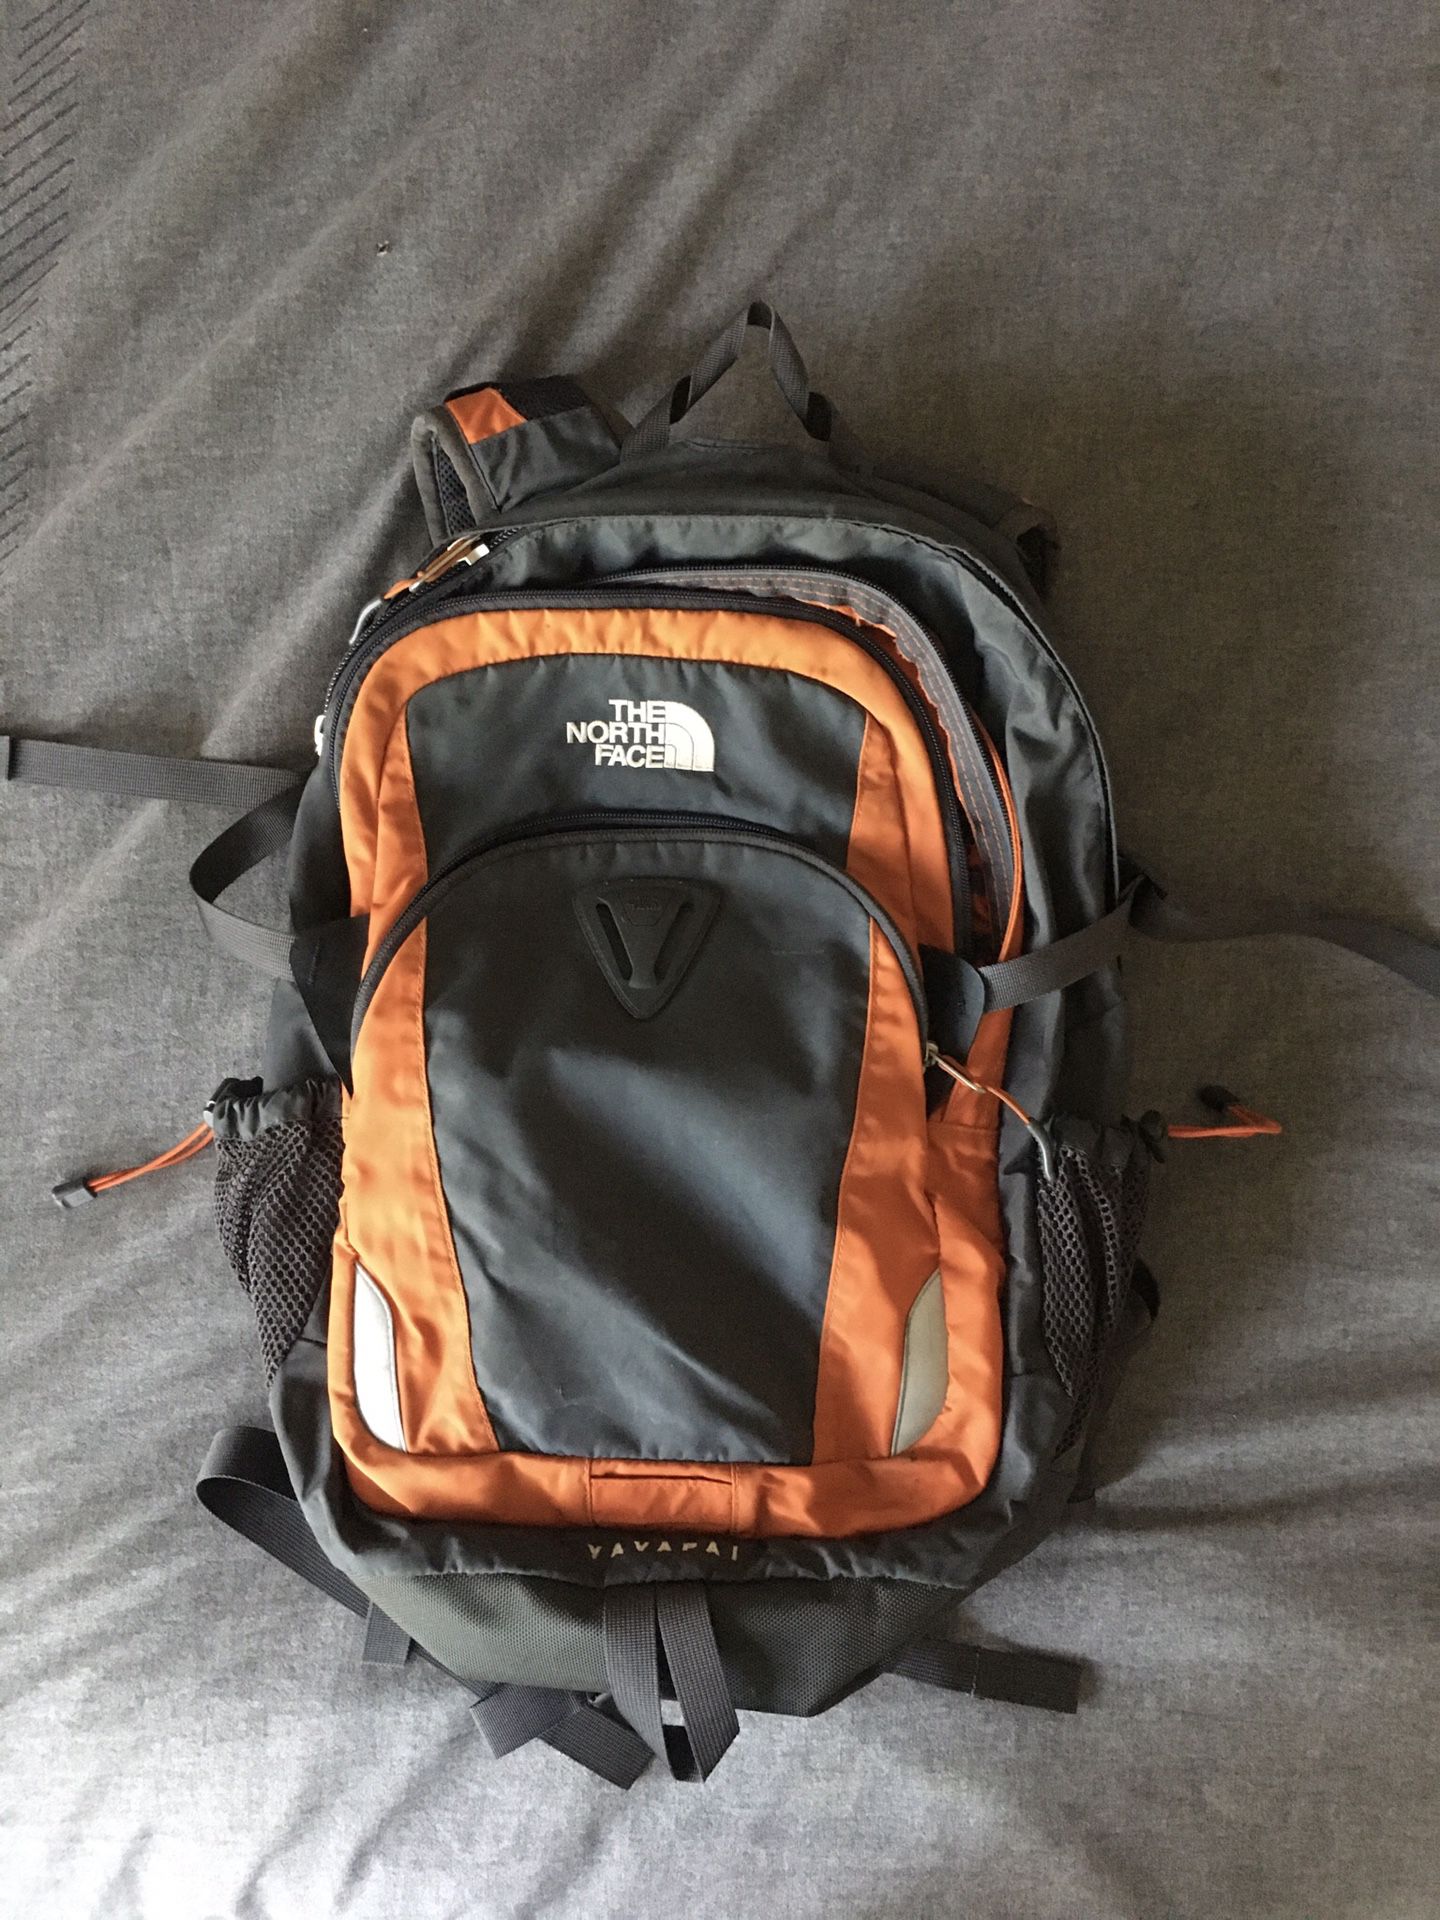 The North Face Yavapai backpack